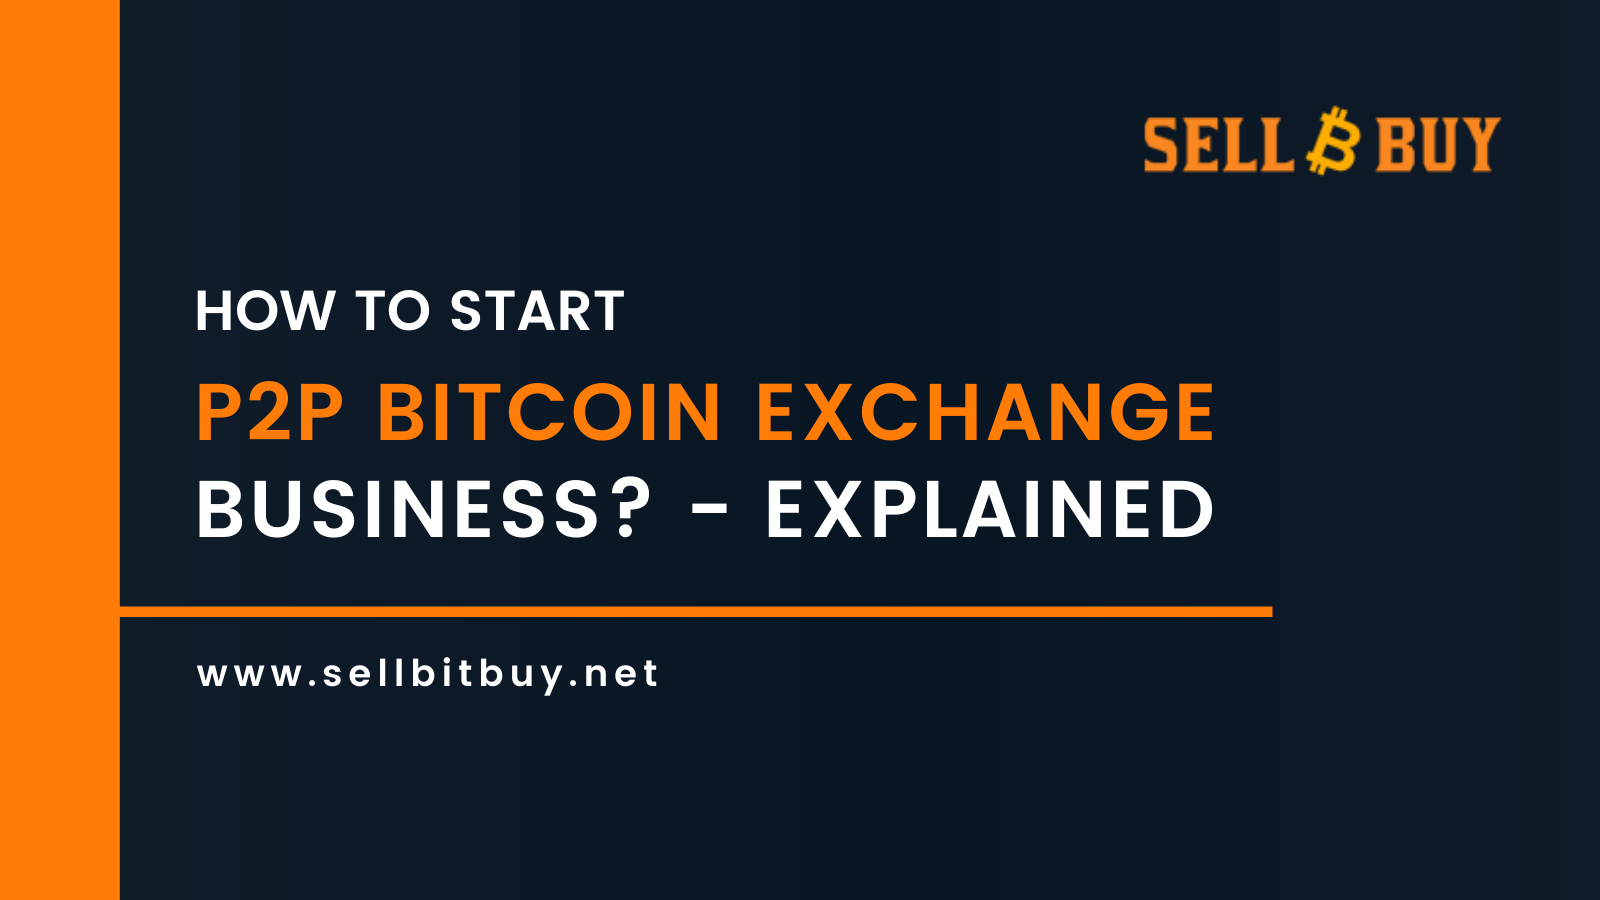 How do I start a Peer-to-Peer Bitcoin Exchange Business?